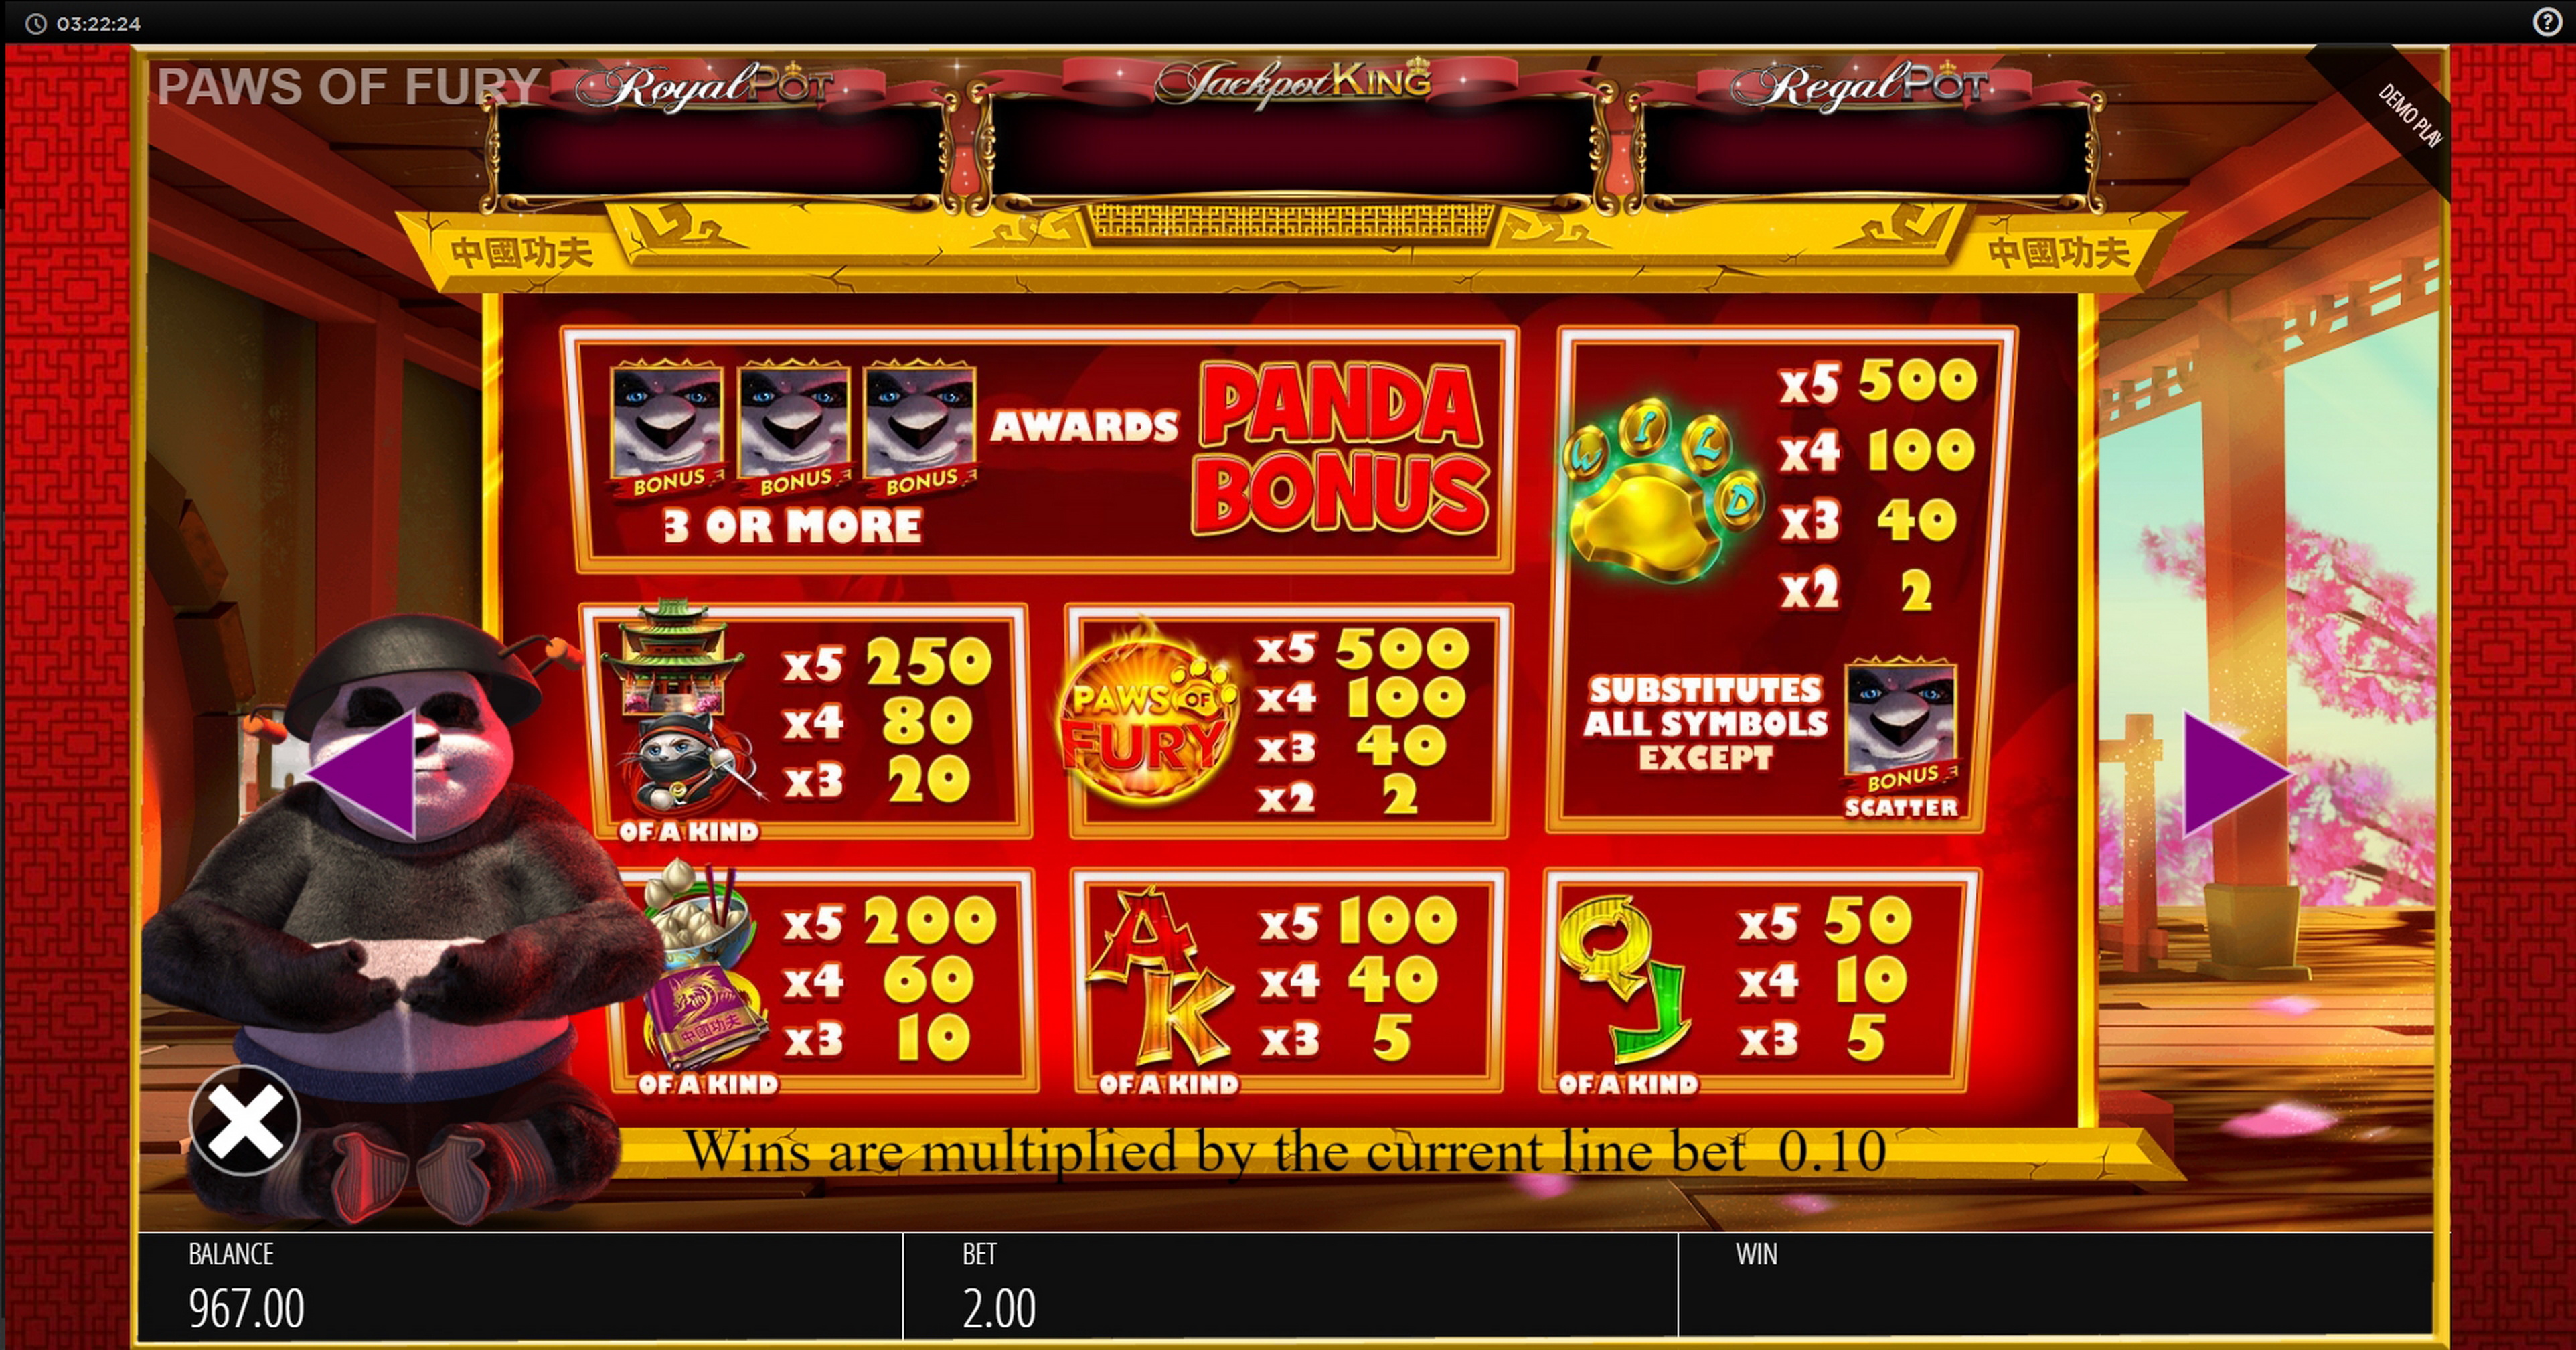 Info of Paws of Fury Slot Game by Blueprint Gaming